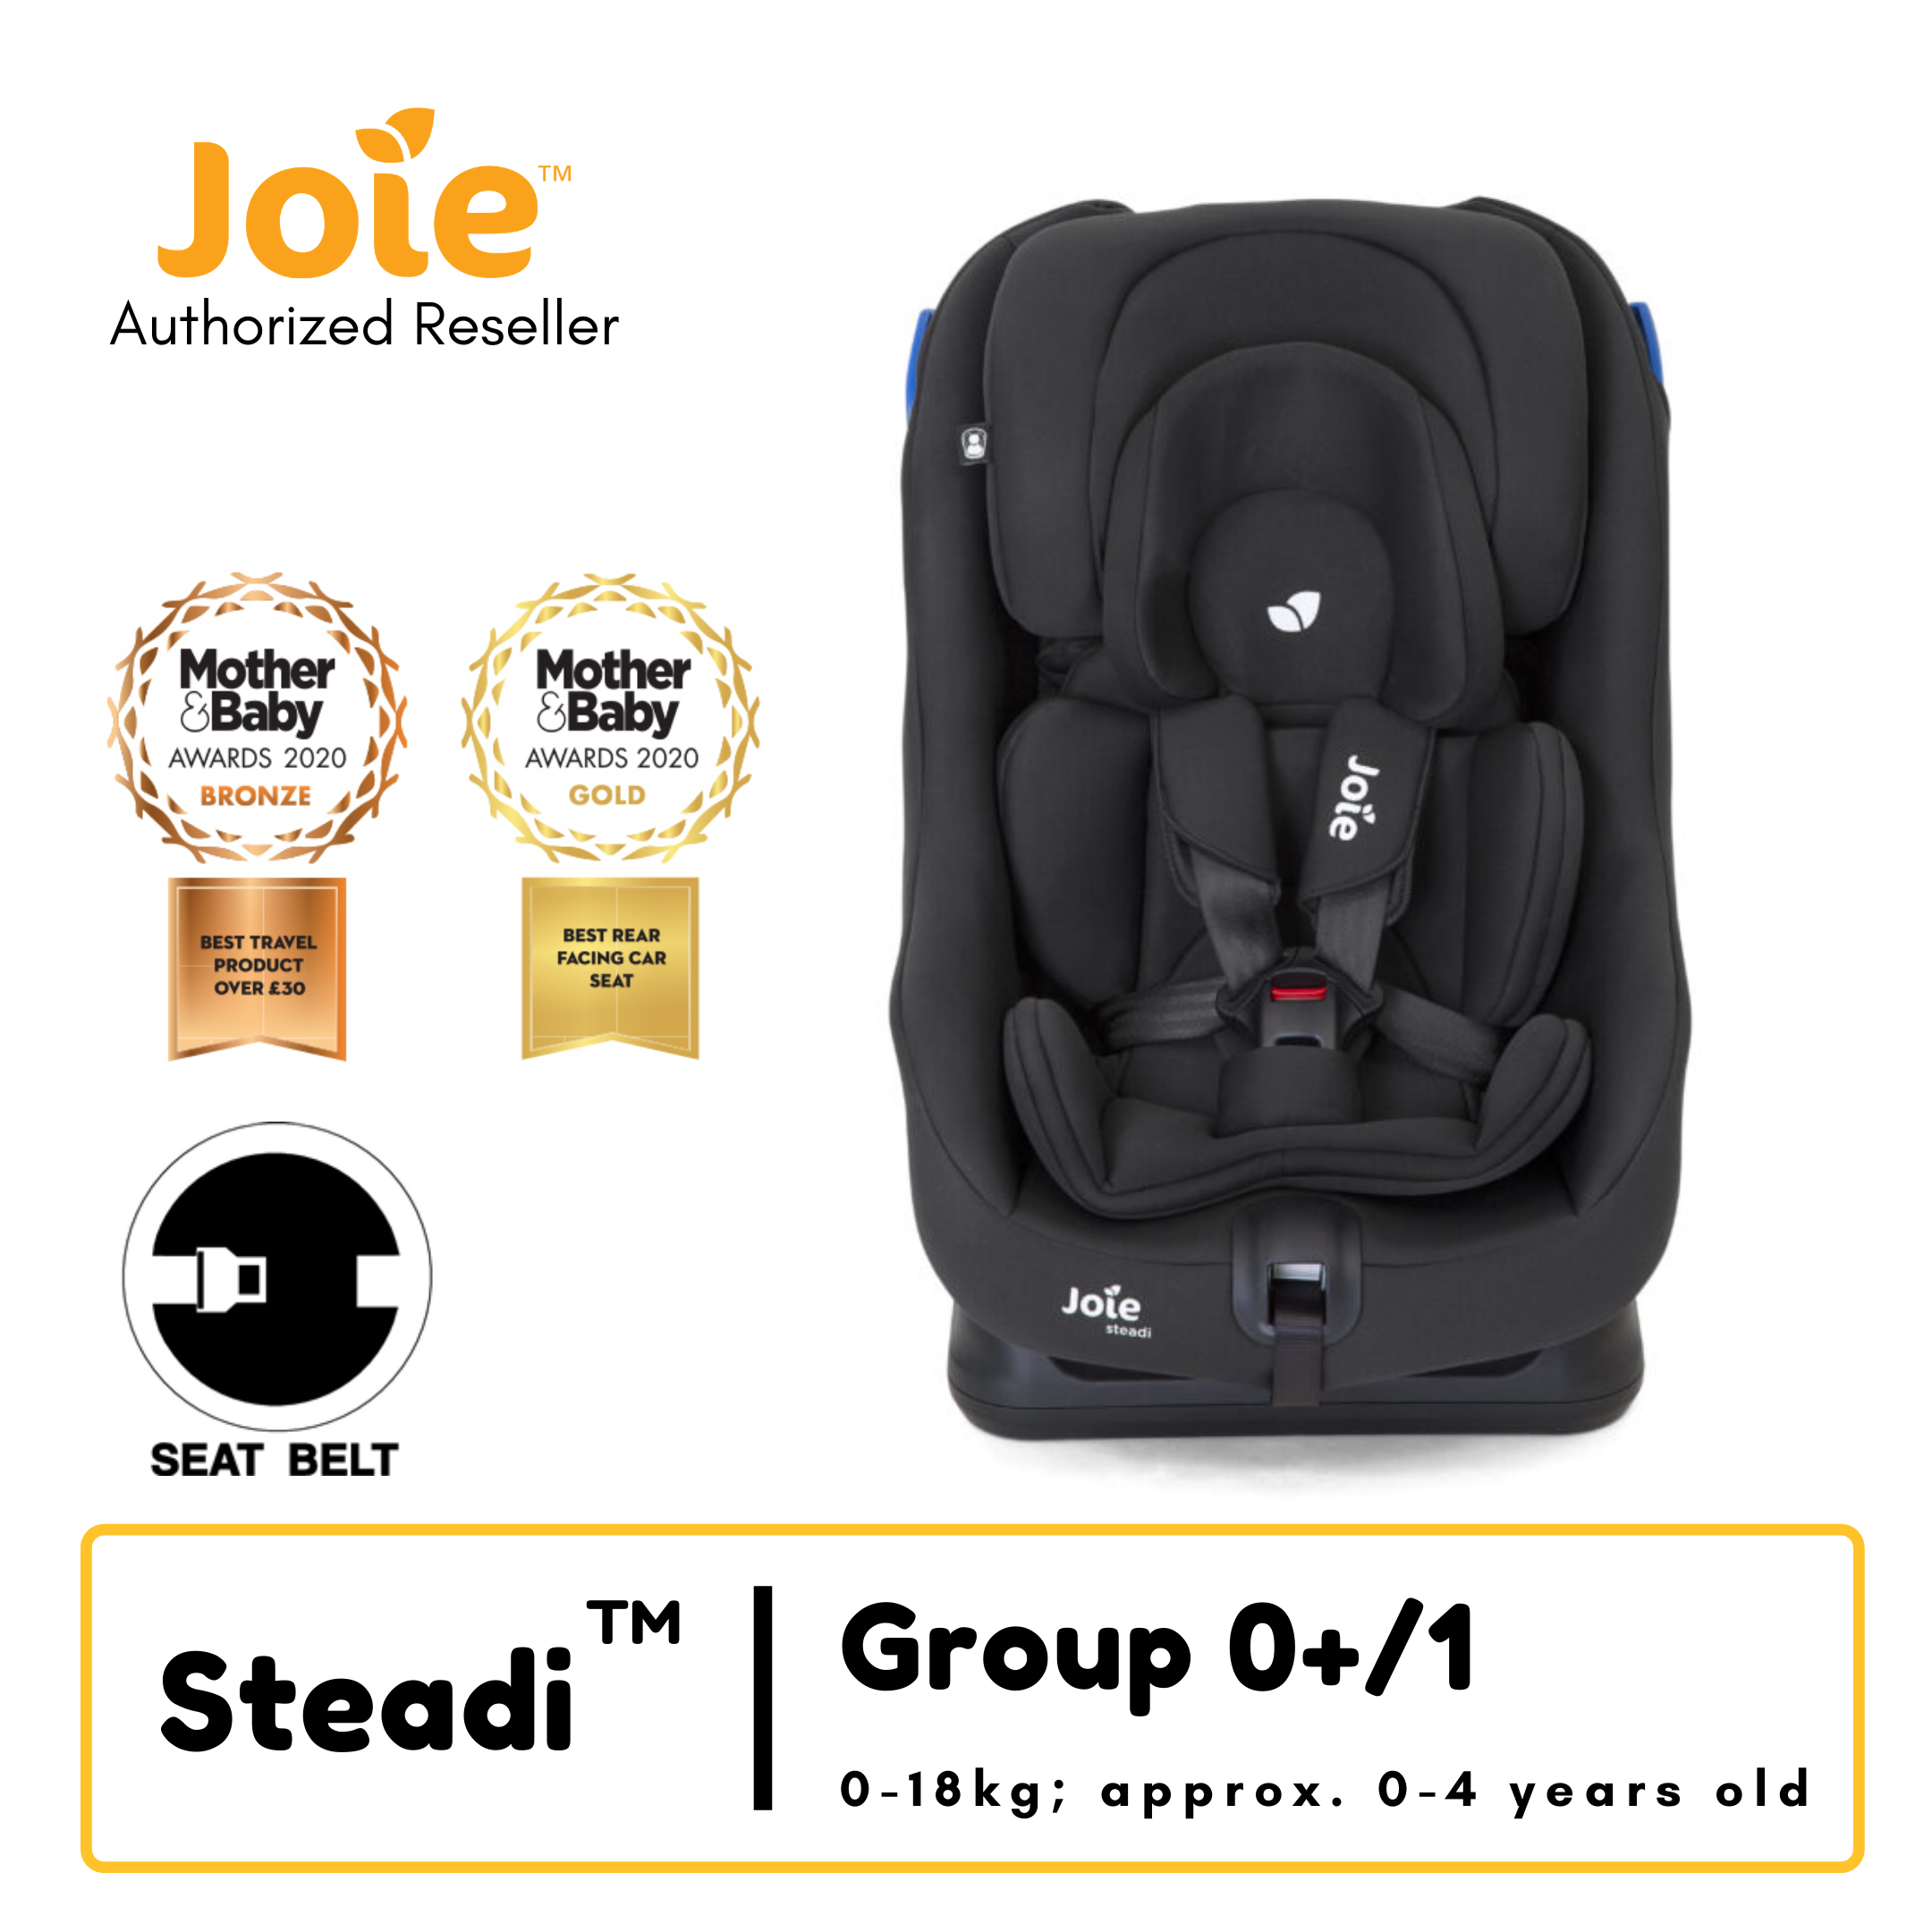 Joie Spin 360 0+/1 ISOFIX Car Seat, Ember - C1416AFEMB000